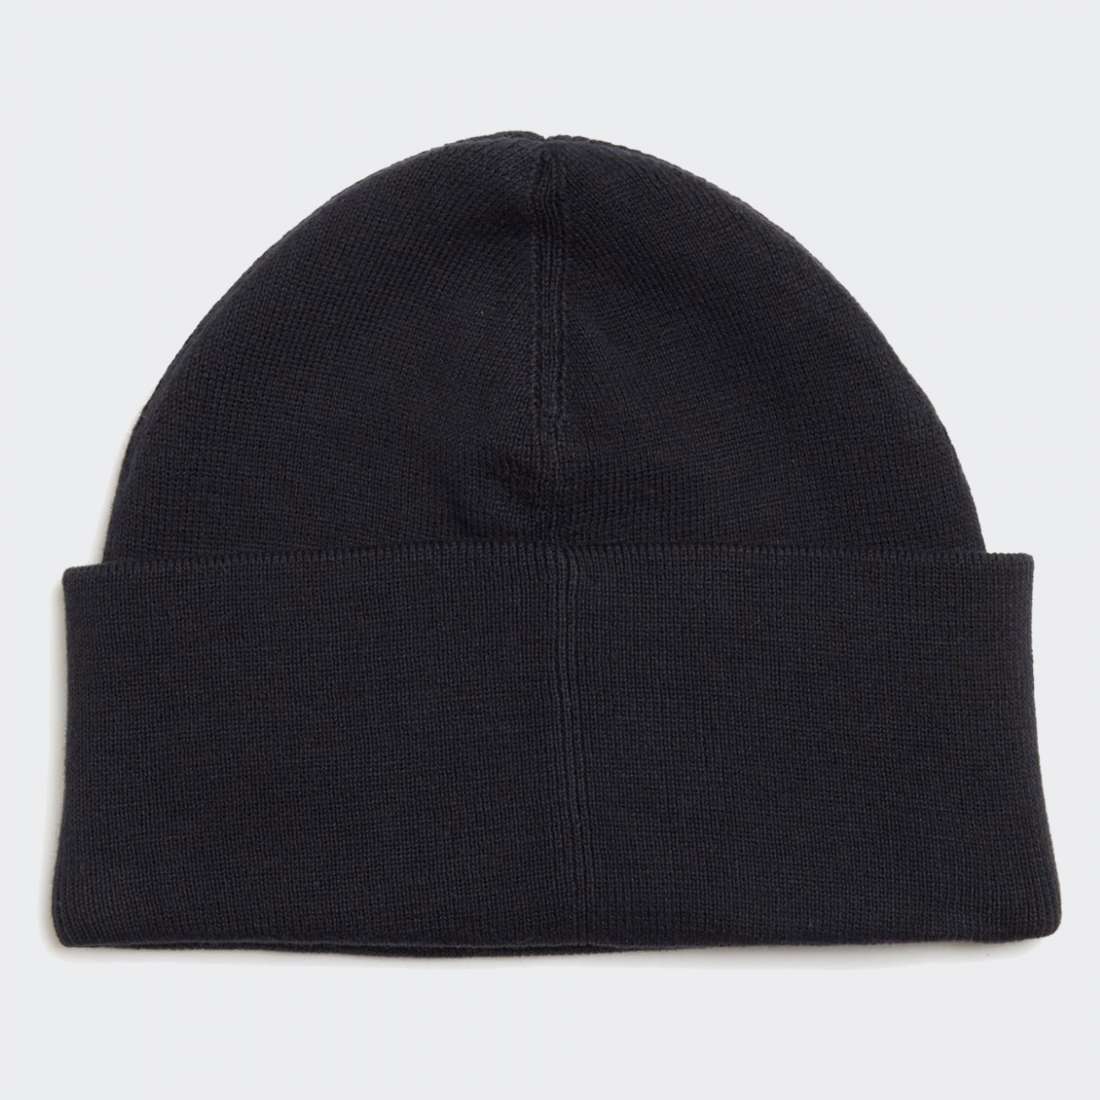 GORRO FRED PERRY GRAPHIC BLACK